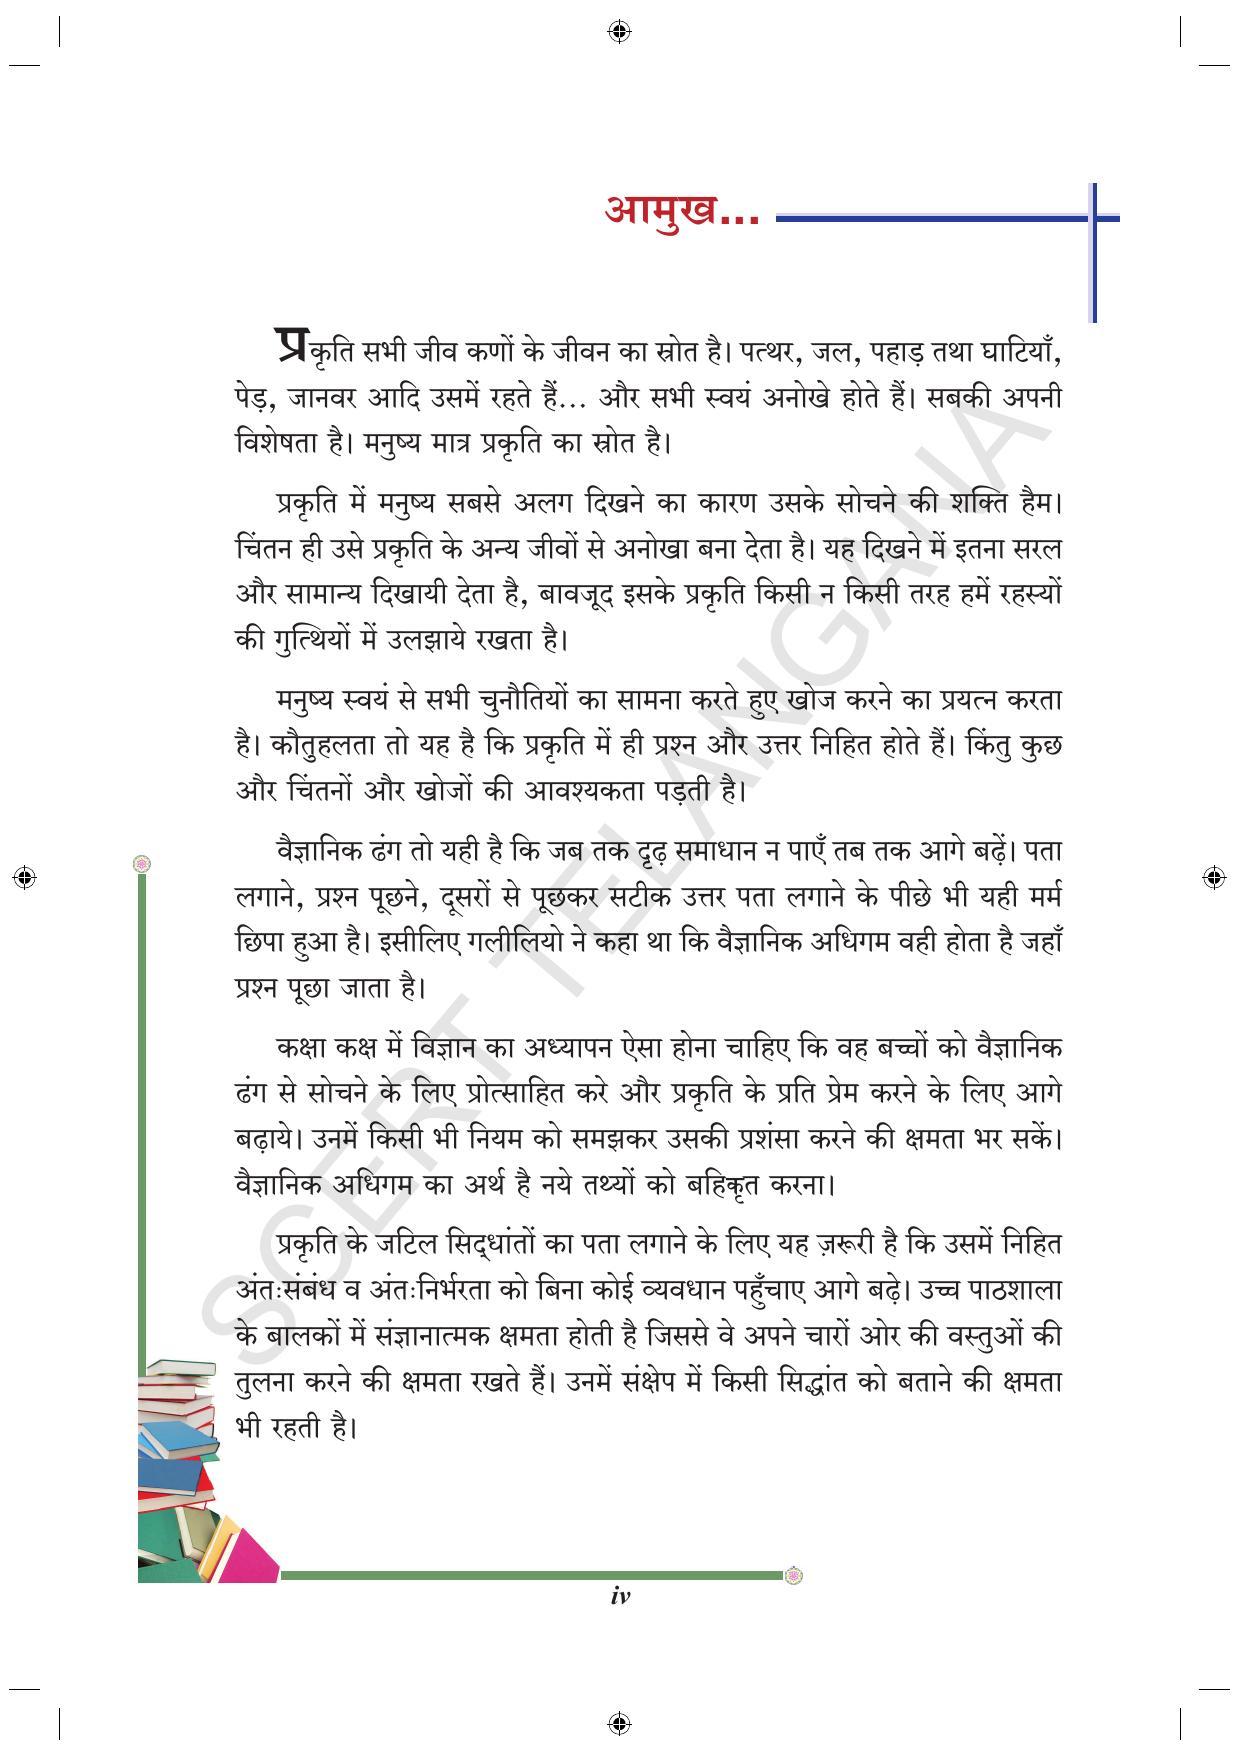 TS SCERT Class 9 Biological Science (Hindi Medium) Text Book - Page 6